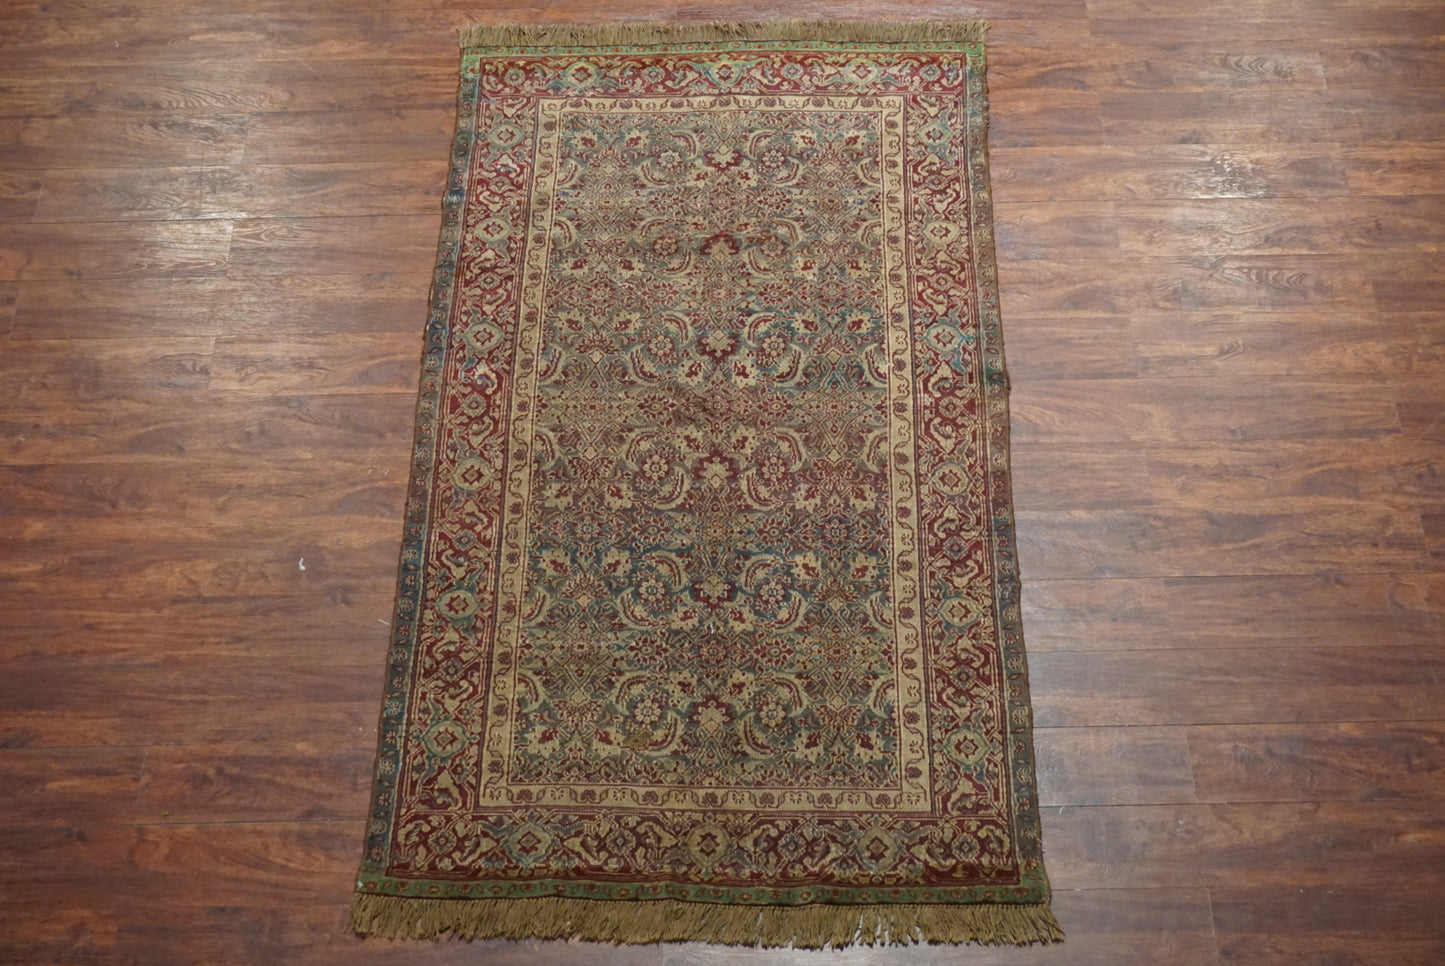 4X7 Antique Green Indian Agra Rug, ca 1900